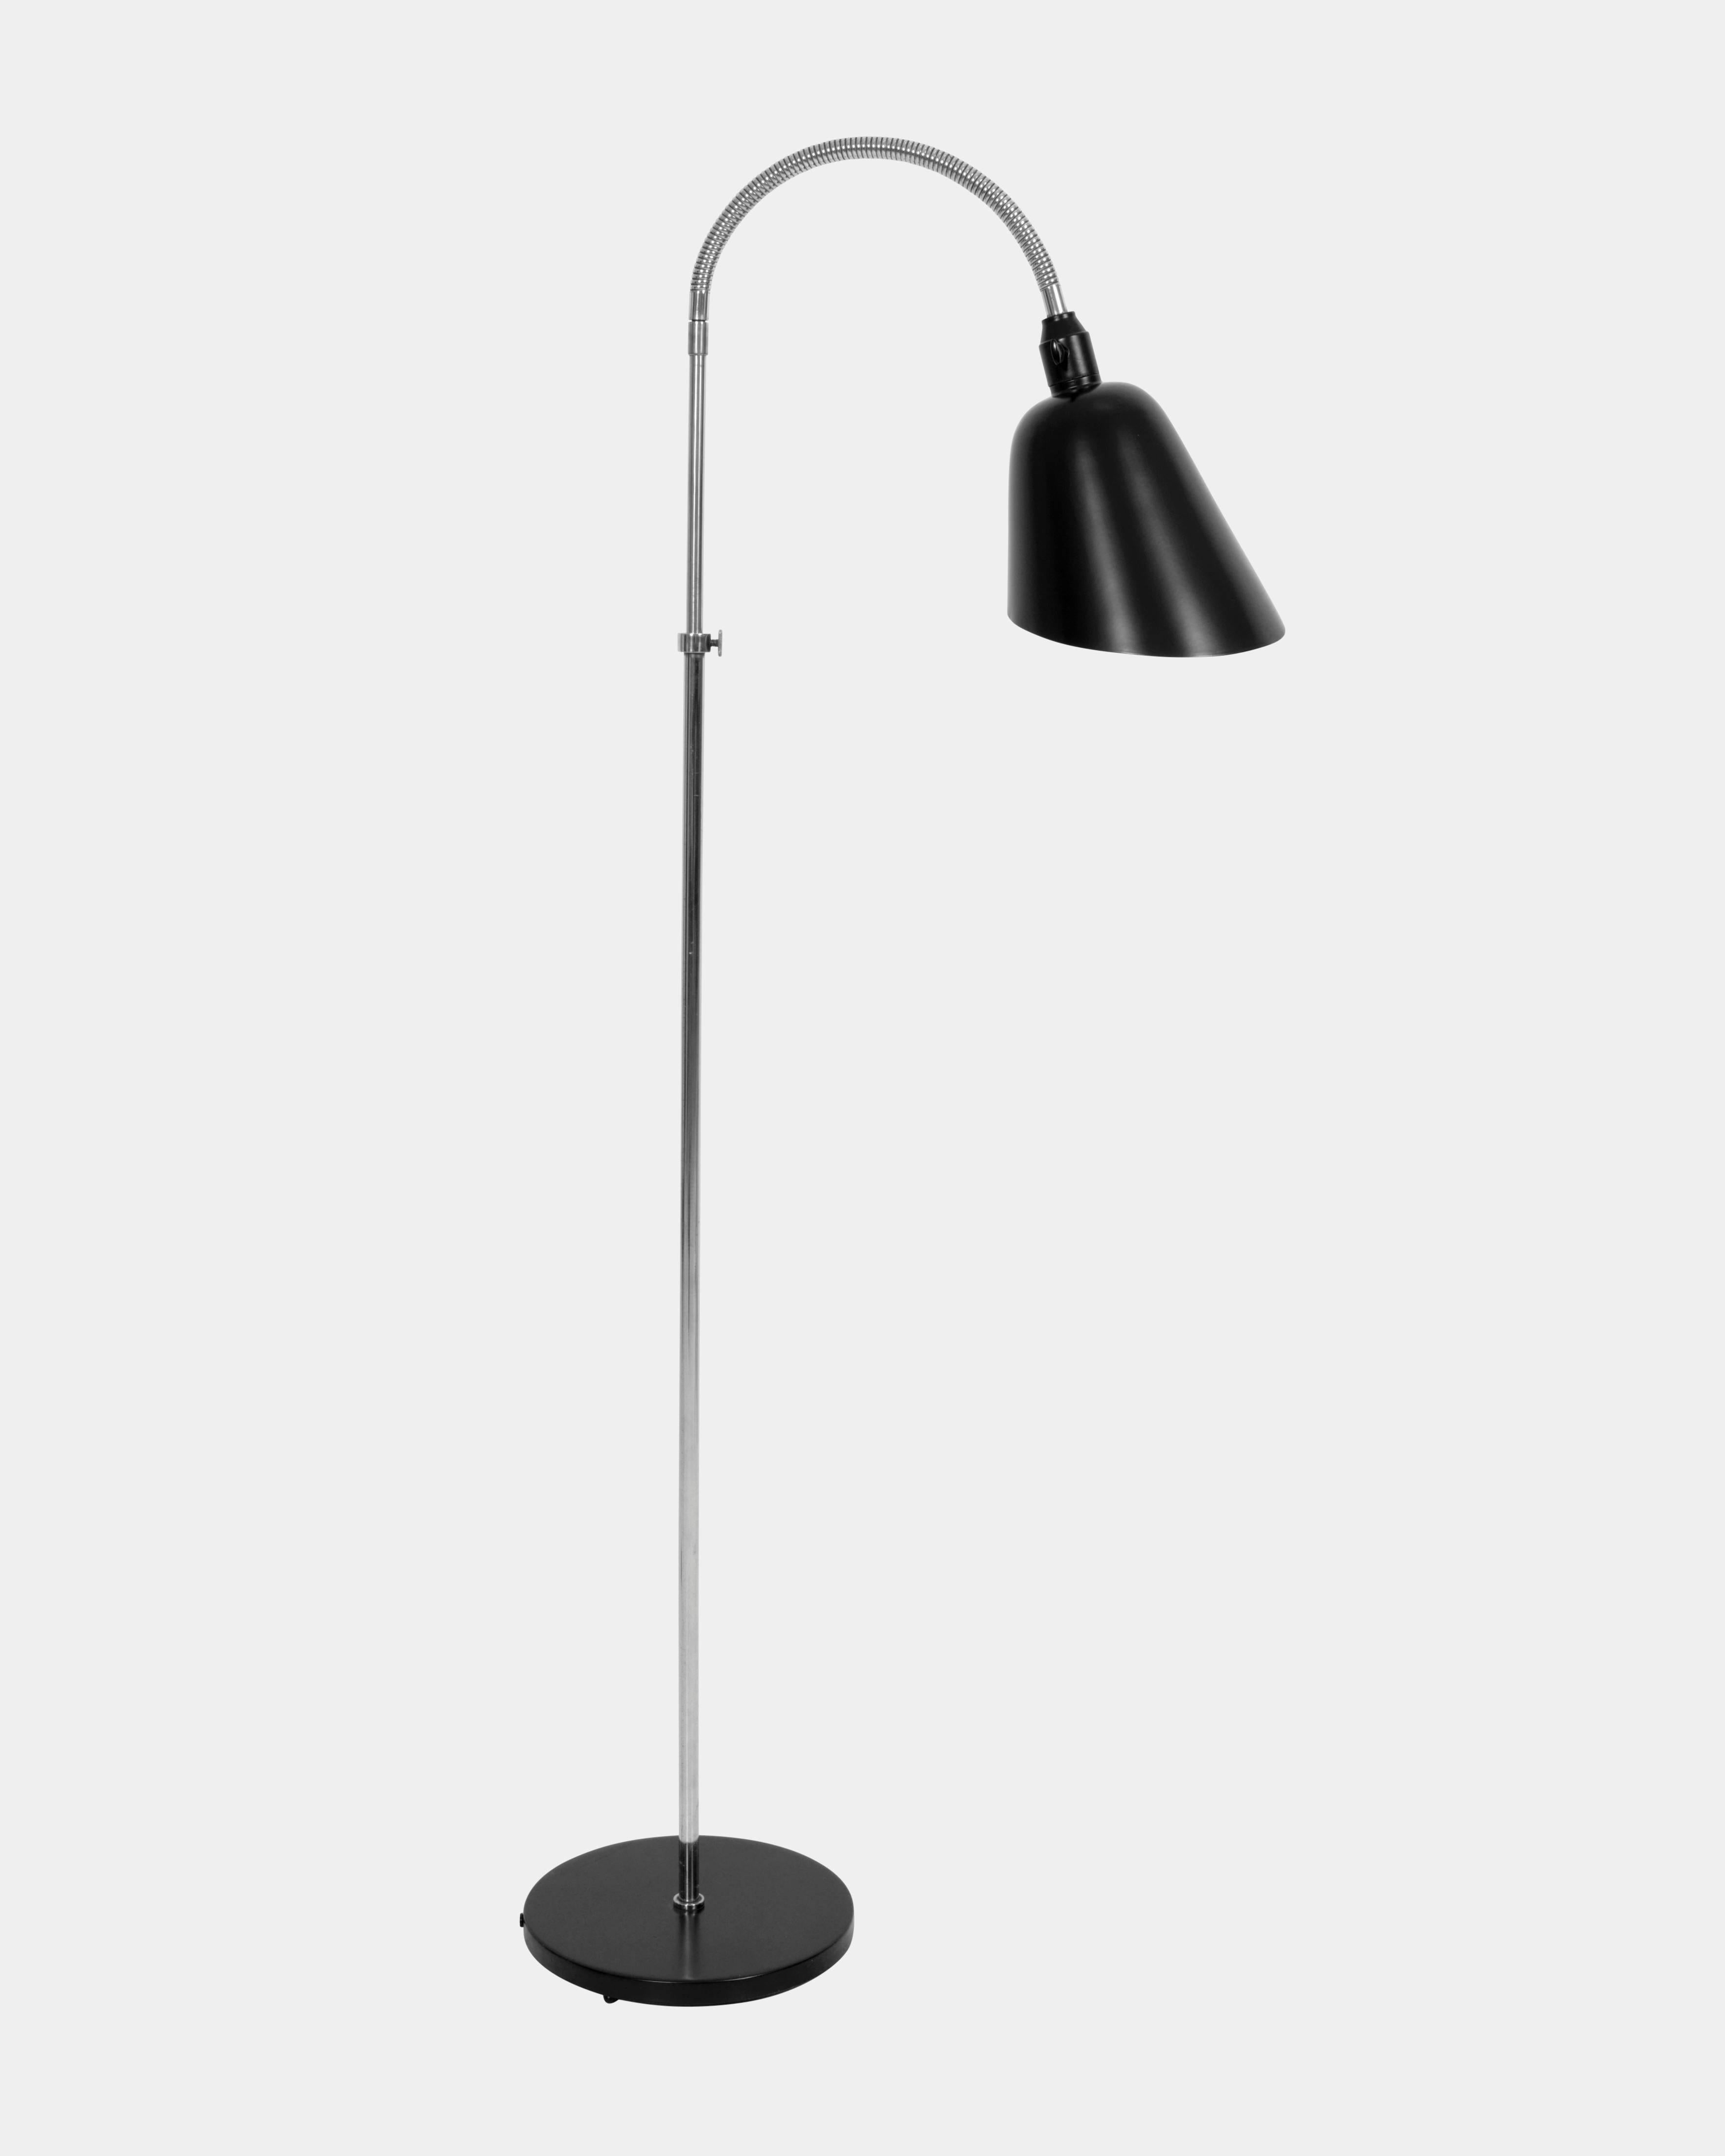 Arne Jacobsen (1902-1971):
Bellevue floor lamp.
Steel stand with black lacquered shade and bakelite switch and house.
Adjustable height.
Designed in 1929 and manufactured på Louis Poulsen.
 